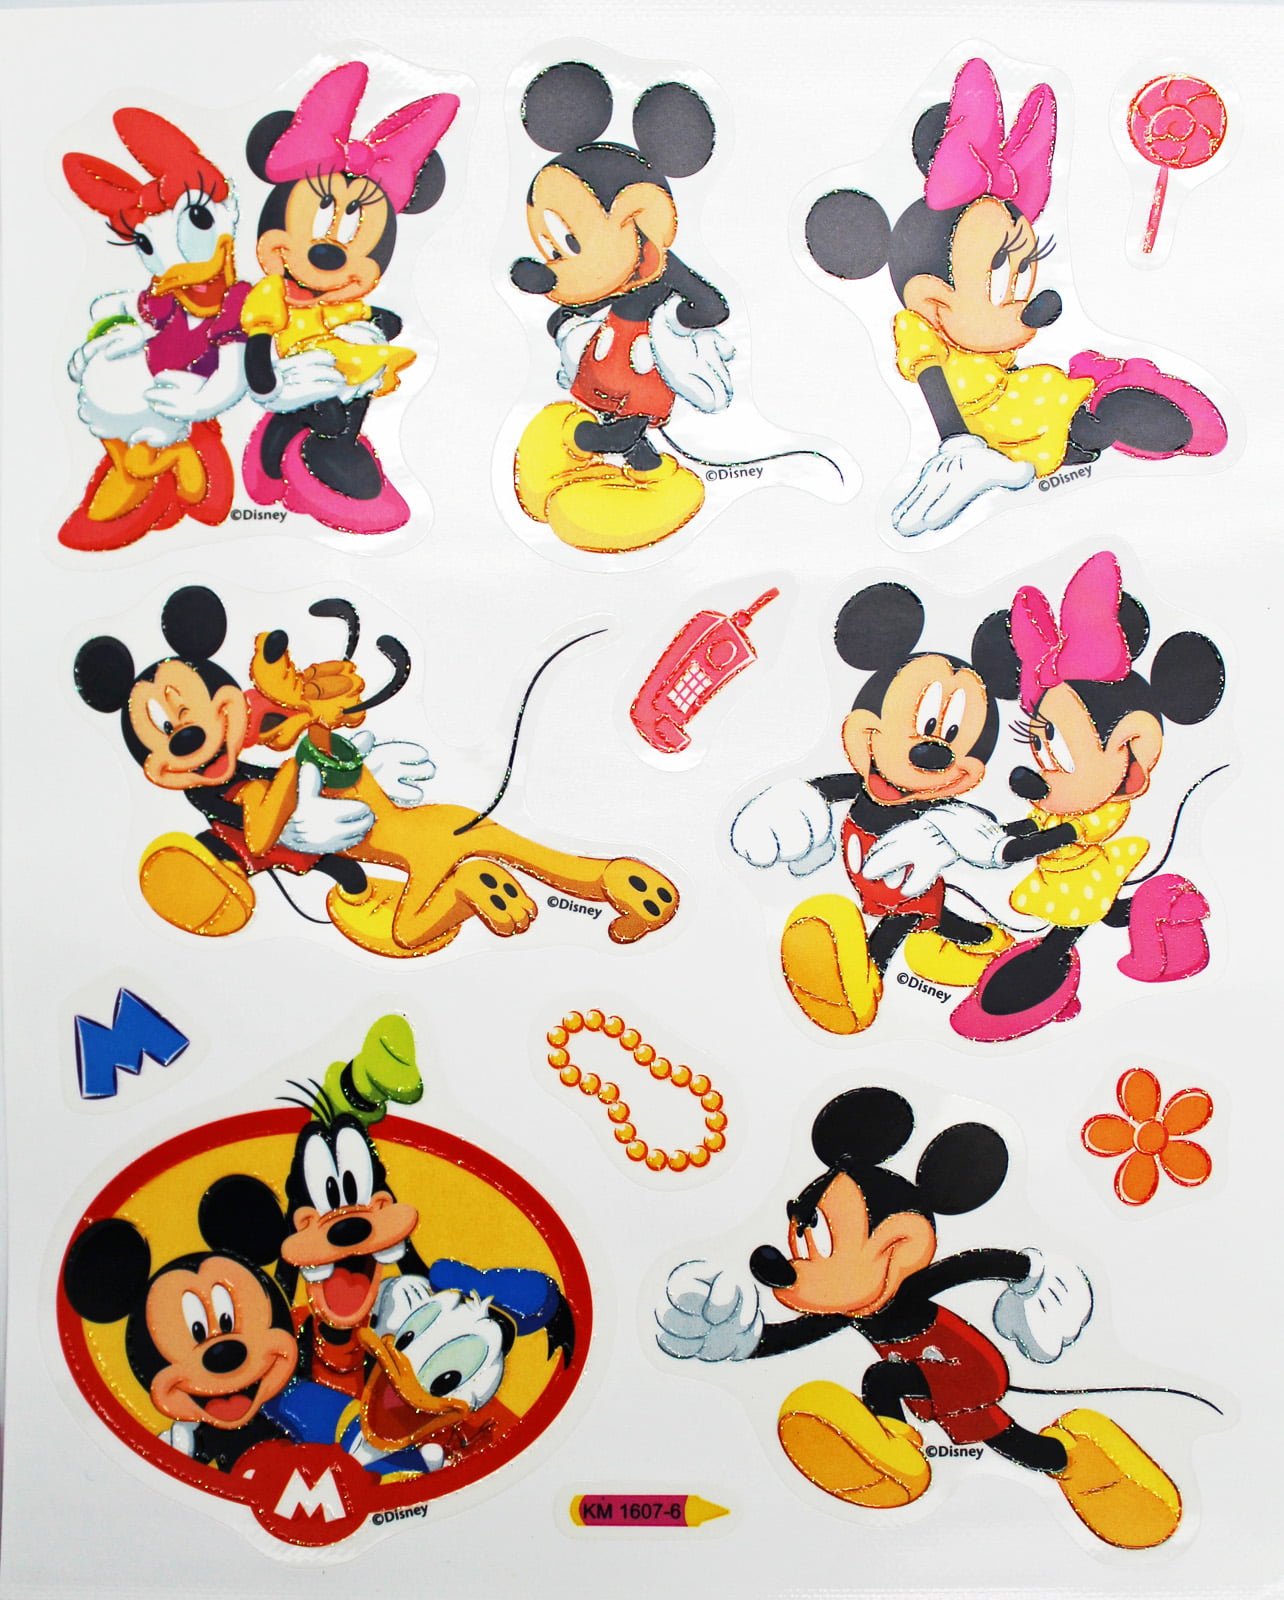 Classic Iconic Disney Characters Sticker Collection (13 Stickers